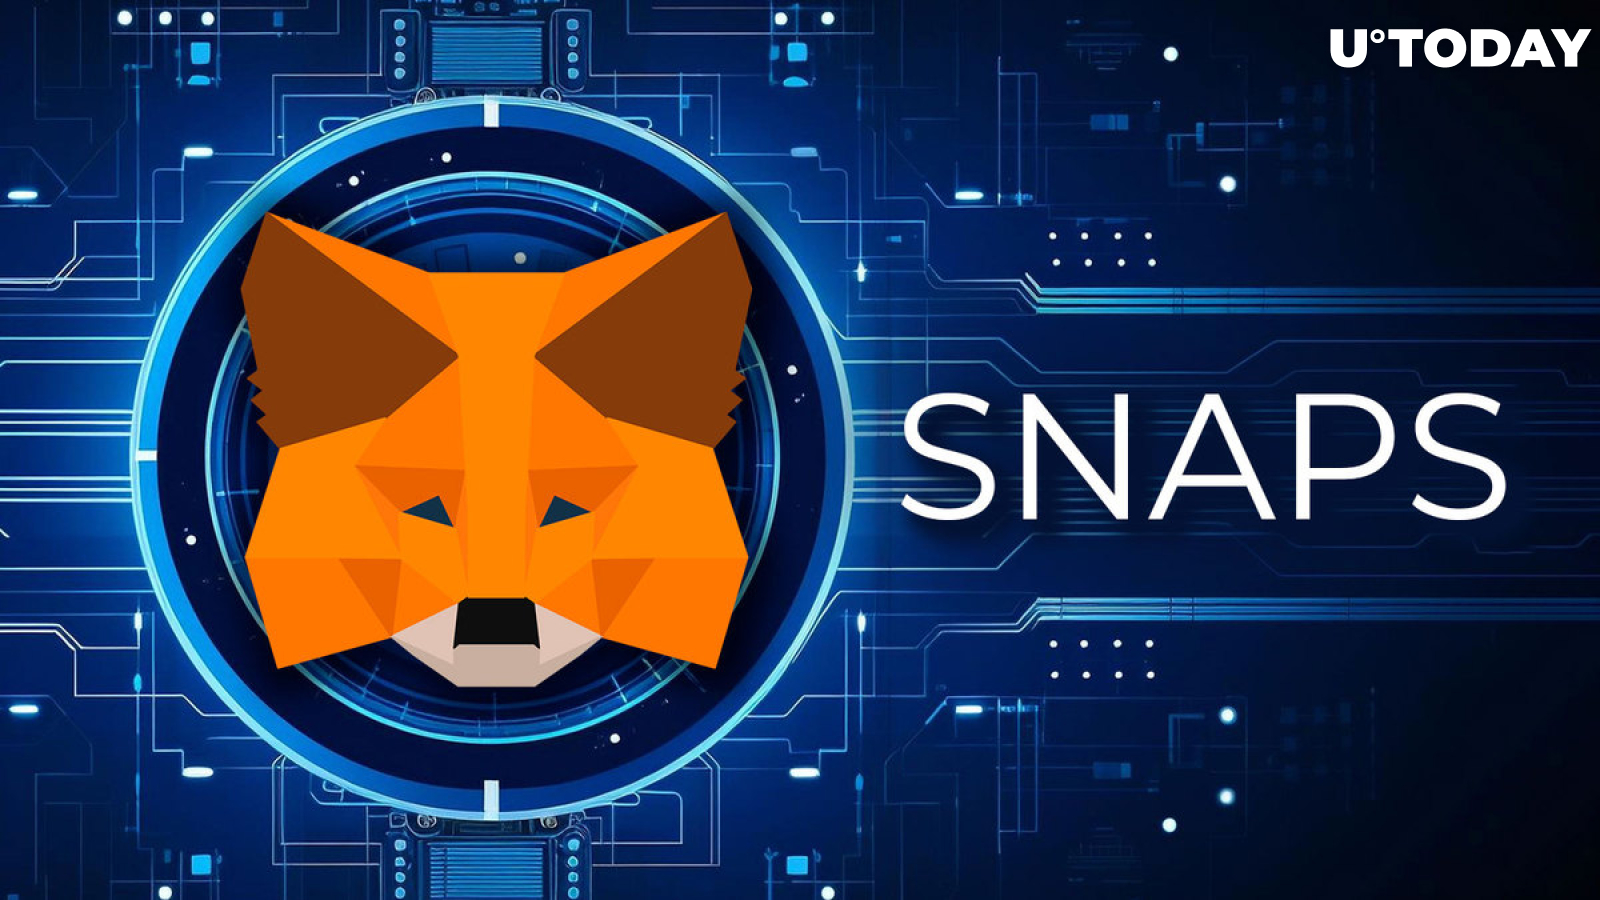 MetaMask Launches Snaps in Open Beta: Why Is This Crucial for Non-EVM Chains?